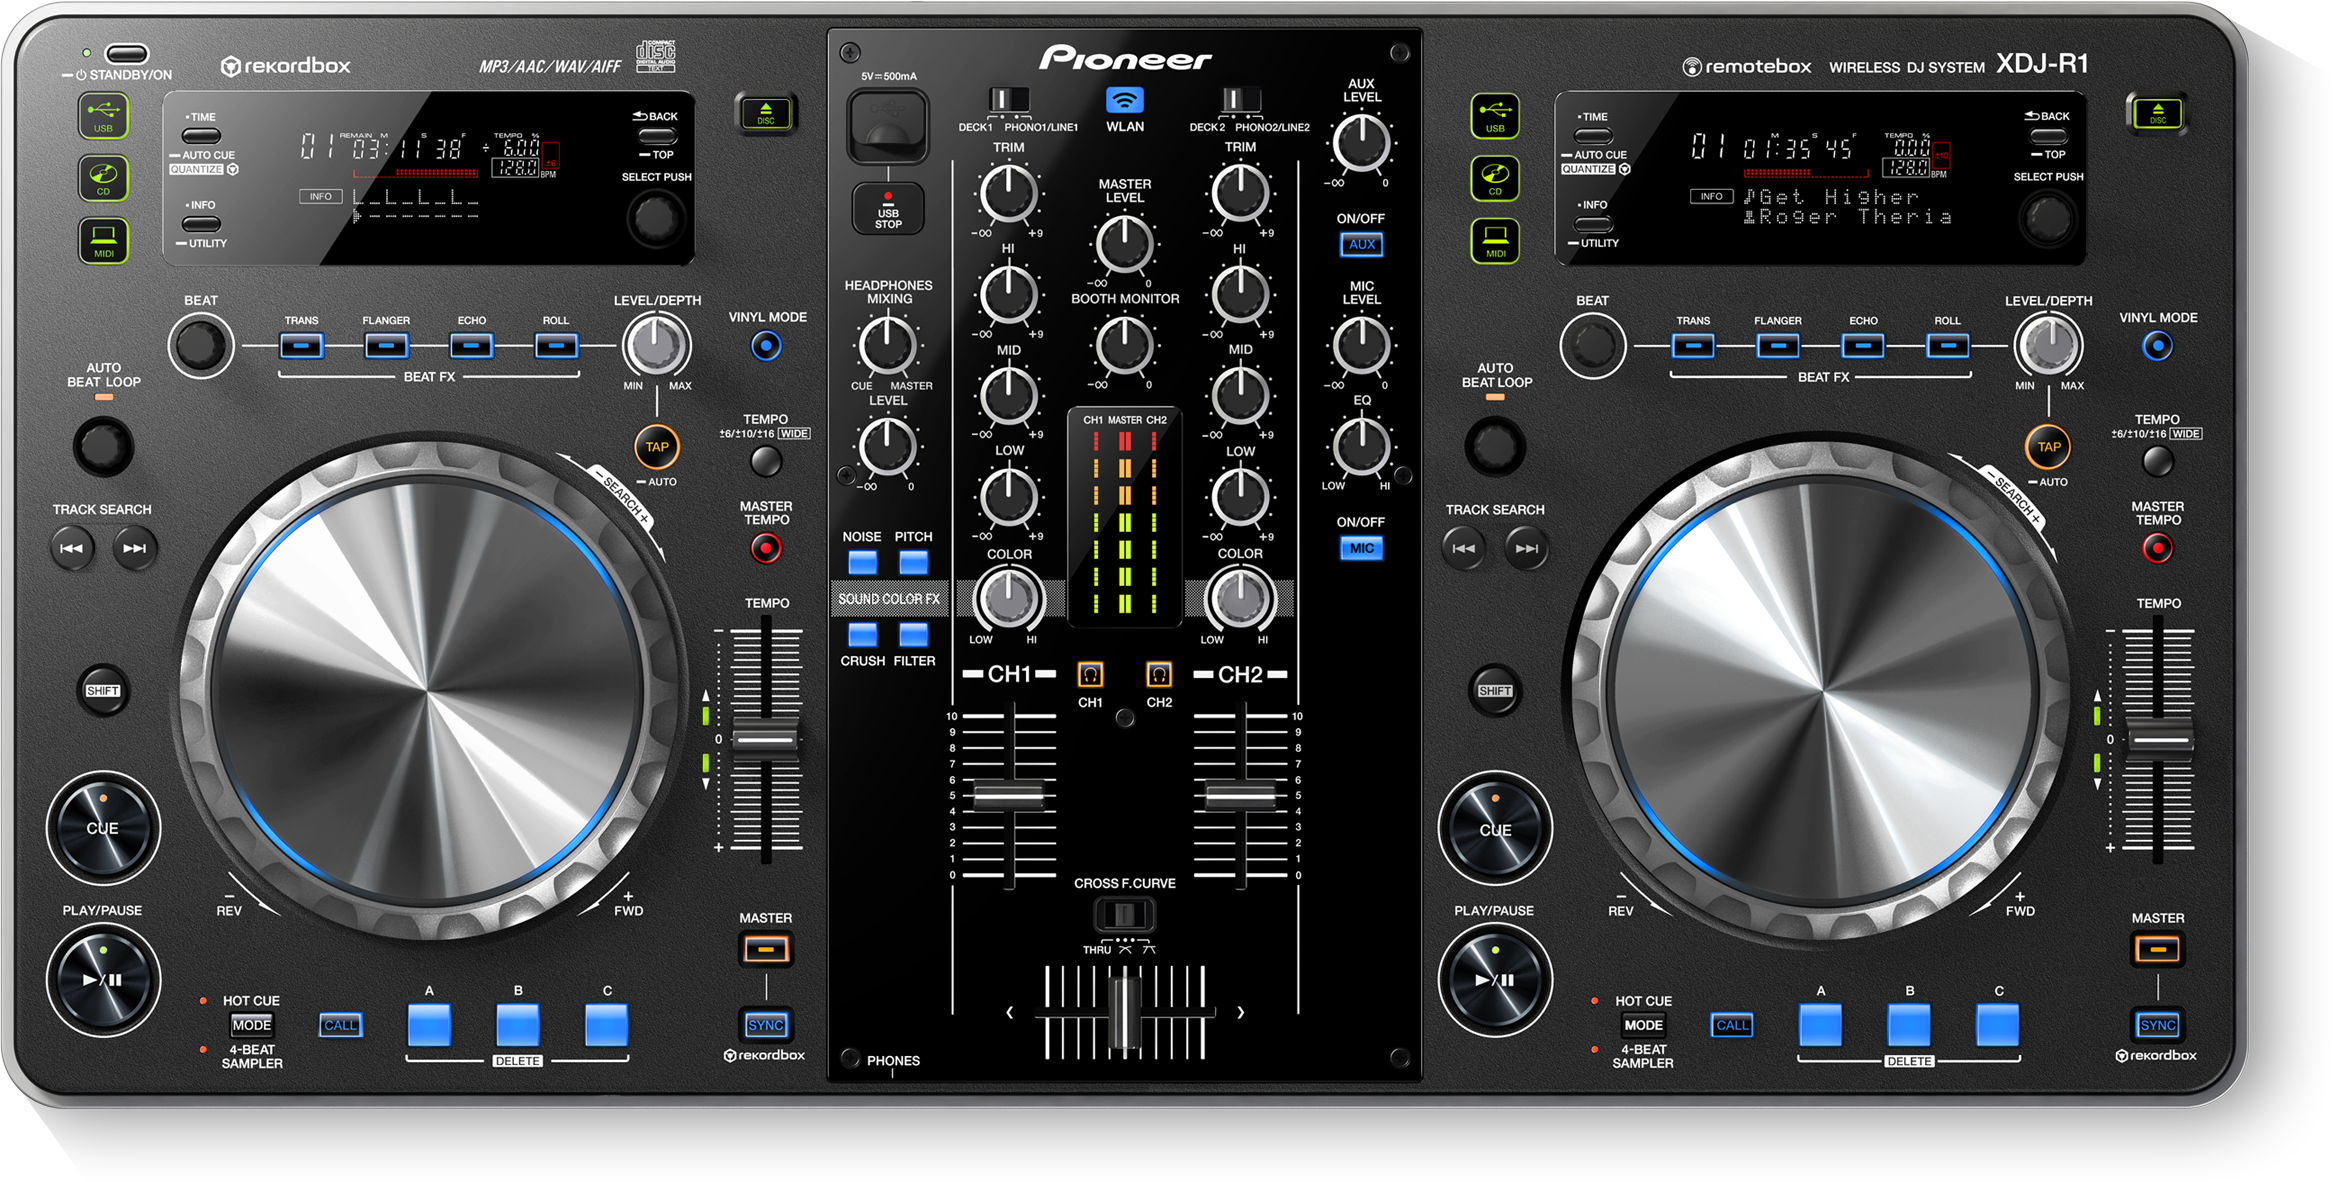 Xdj R1 All In One Dj System For Remotebox (black) - Pioneer Xdj R1 Wireless Dj System And Controller (2333x1182), Png Download